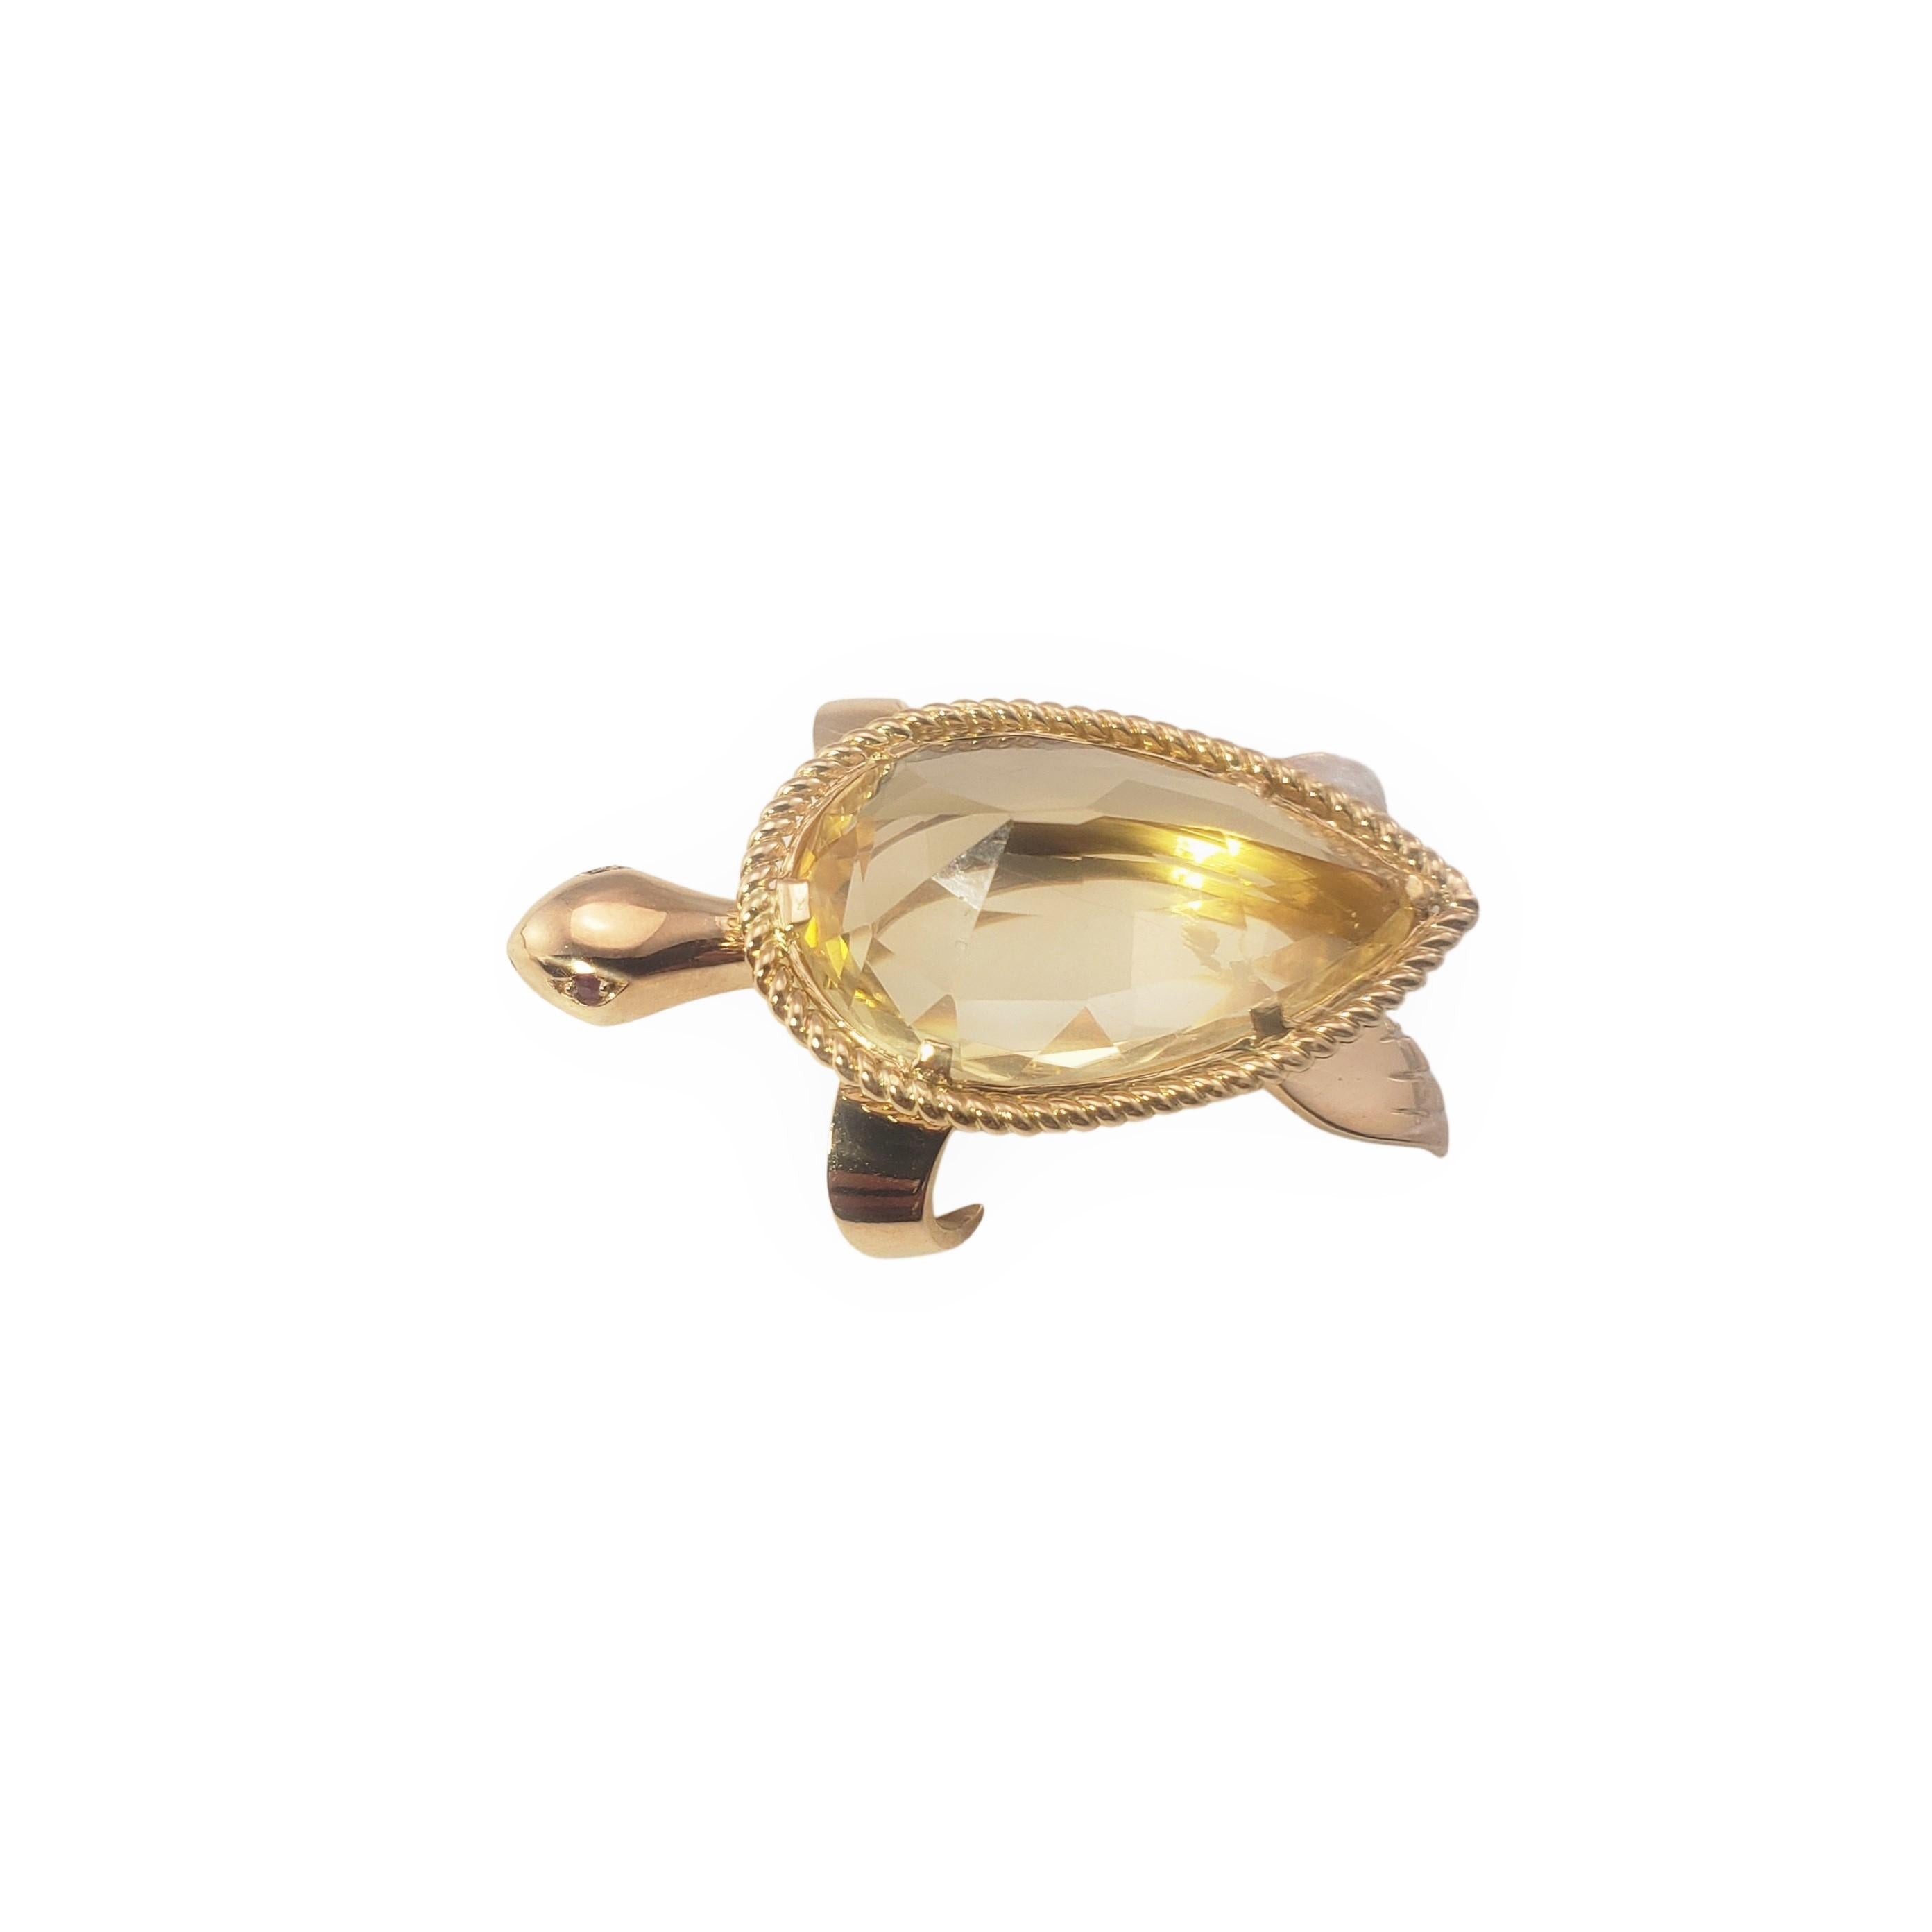 18 Karat Rose Gold and Citrine Turtle Brooch/Pin GAI Certified-

This lovely turtle pin features one pear shaped citrine (22 mm x 13 mm) set in beautifully detailed 18K rose gold. Accented with two red gemstone eyes.

Citrine weight:  17.02